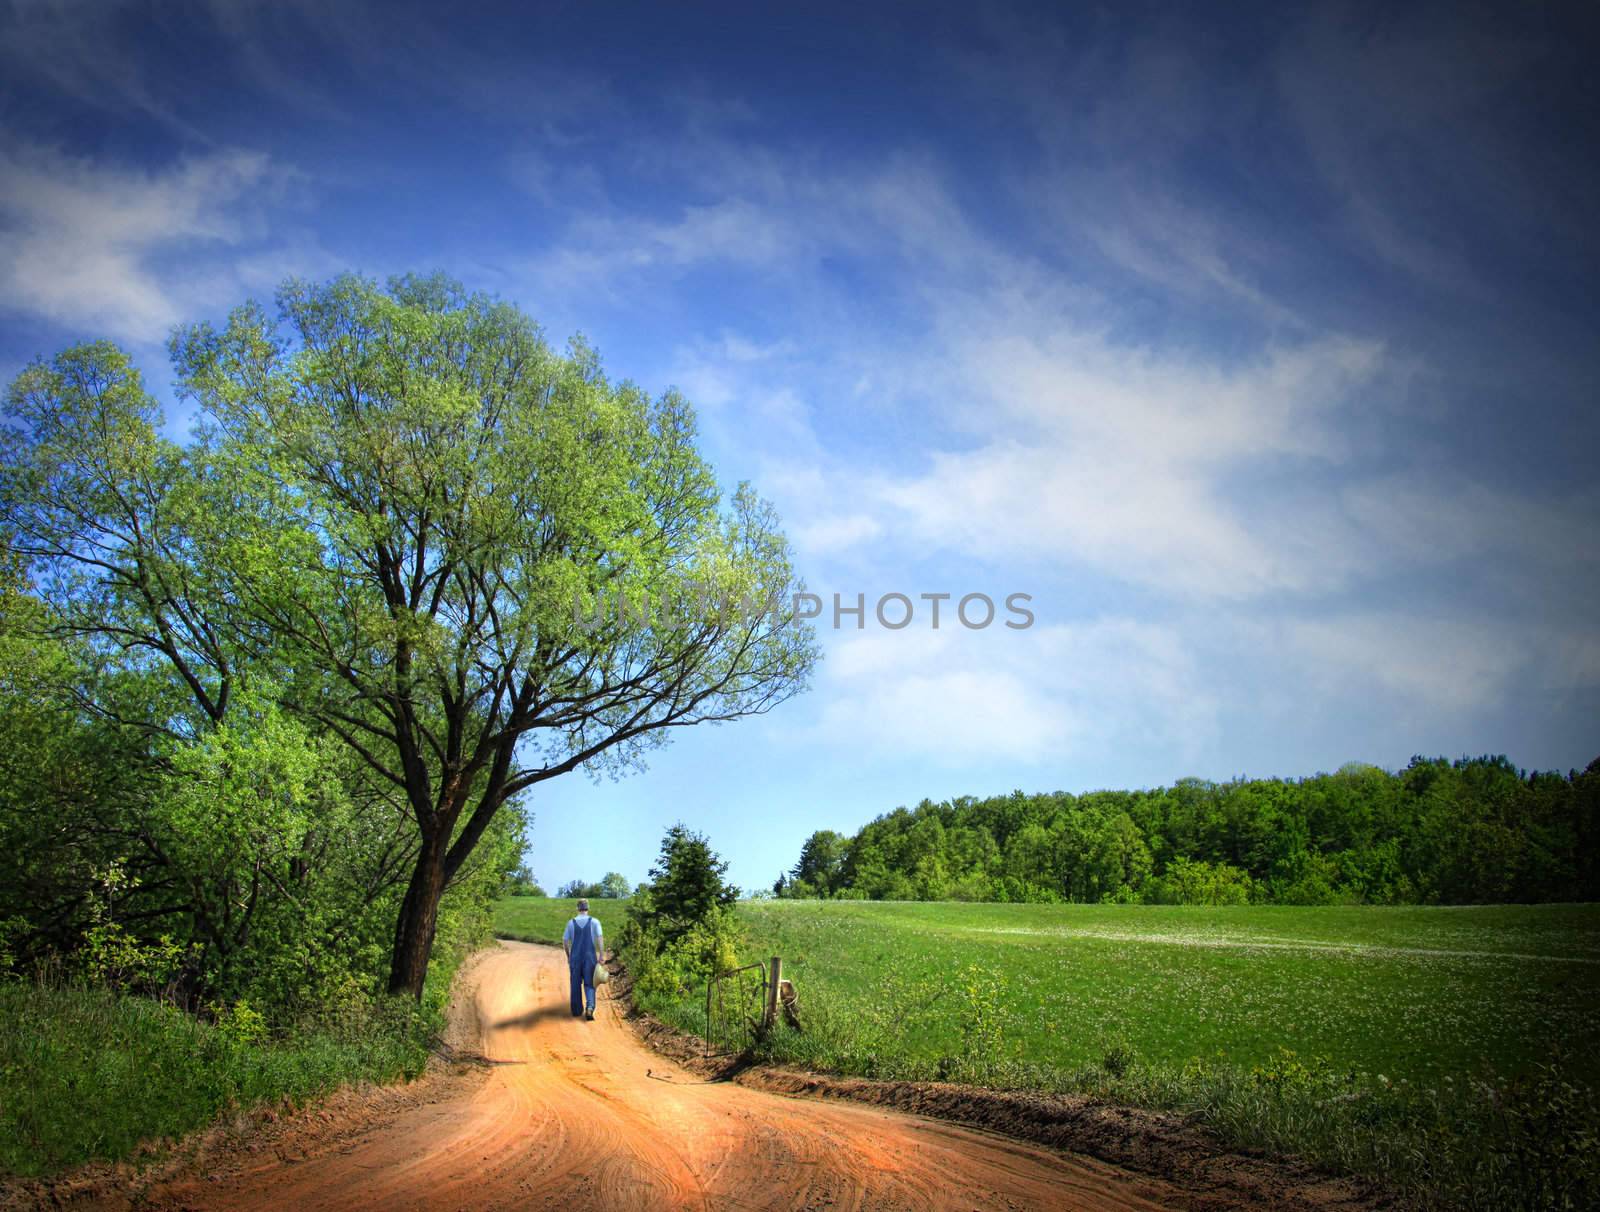 Dusty road on a beautiful spring day by Sandralise